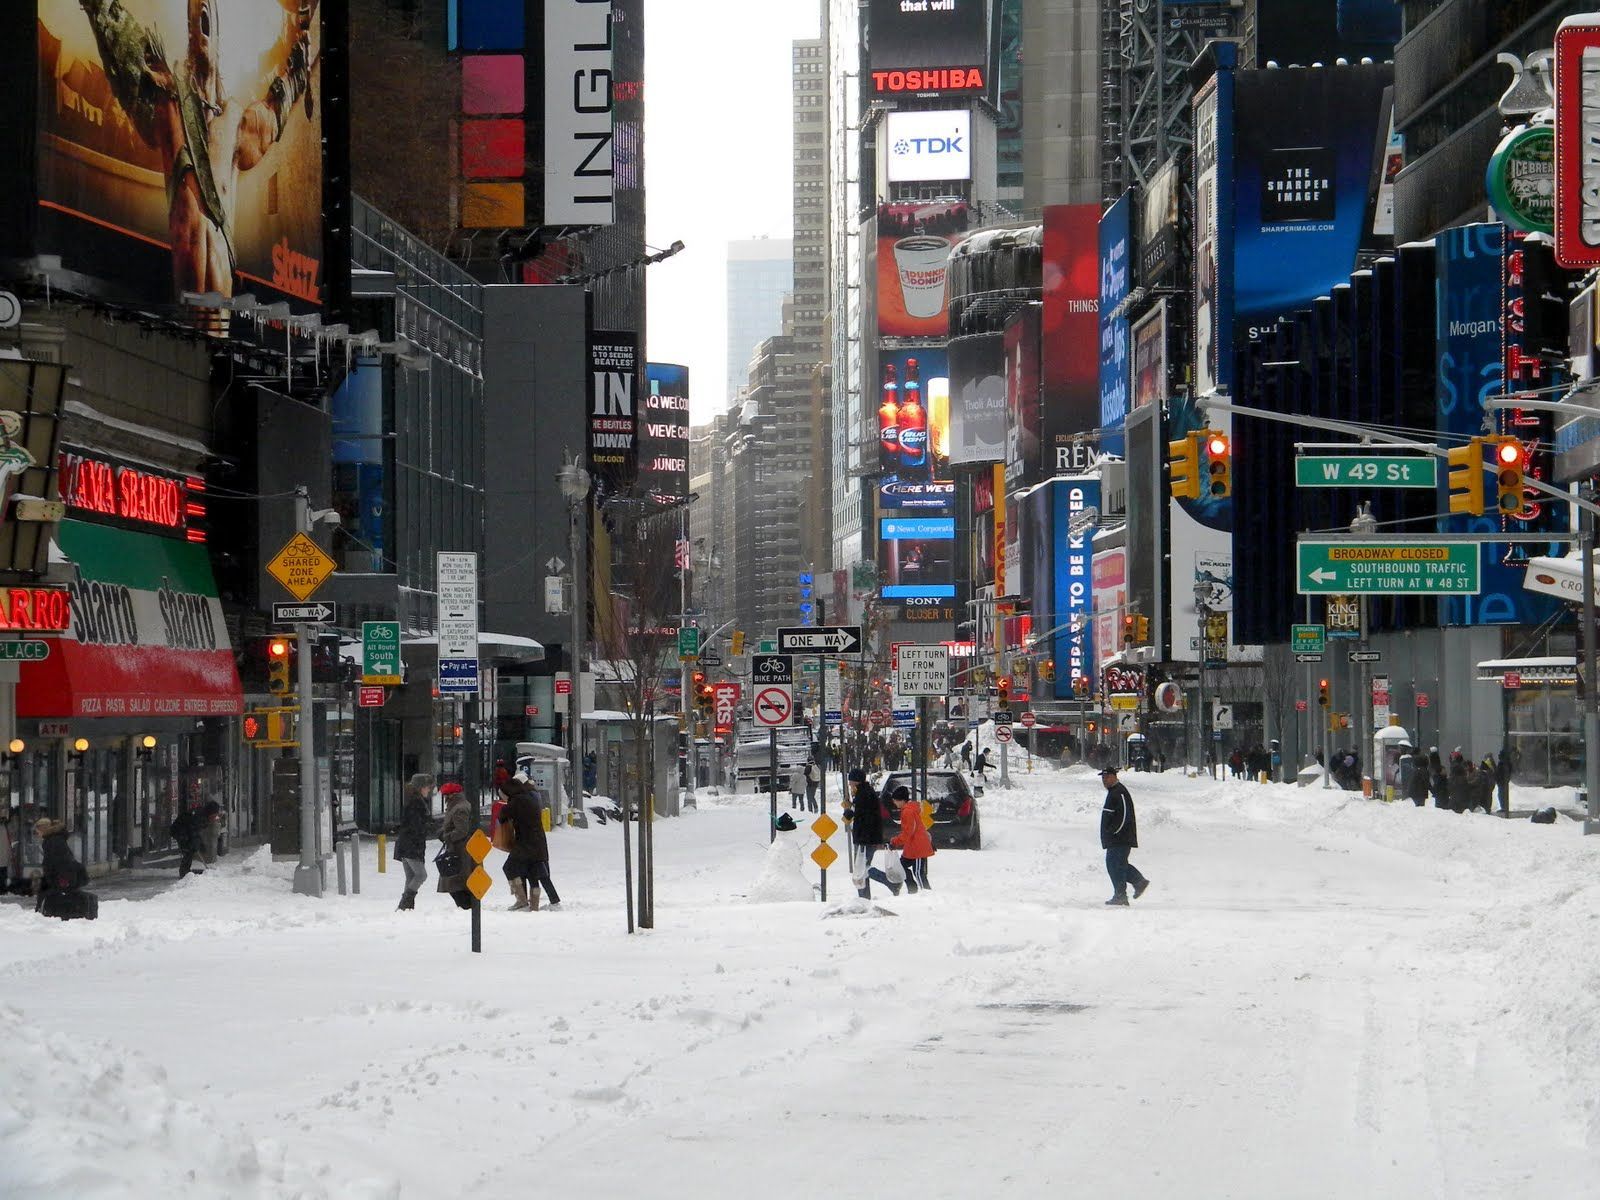 Winter Snow Storm New York City 12 26 10 Times Square Public Domain Clip Art Photo And Image. New York Winter, Nyc Snow, New York City Image